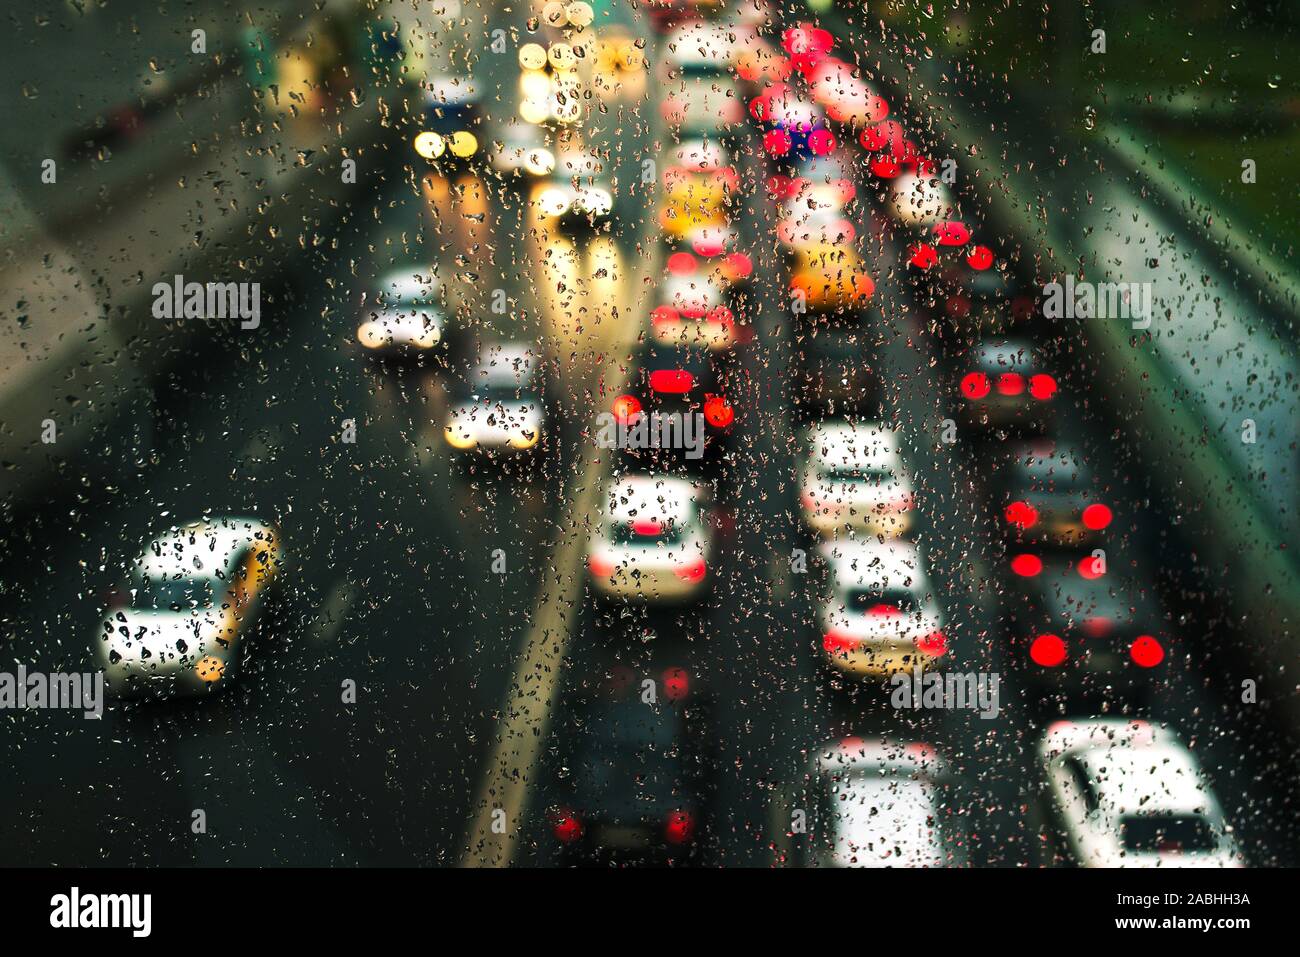 Urban background with blurry cars and expensive, shallow depth of field. Rainy and cloudy day. Car traffic shot through glass, focusing on raindrops Stock Photo